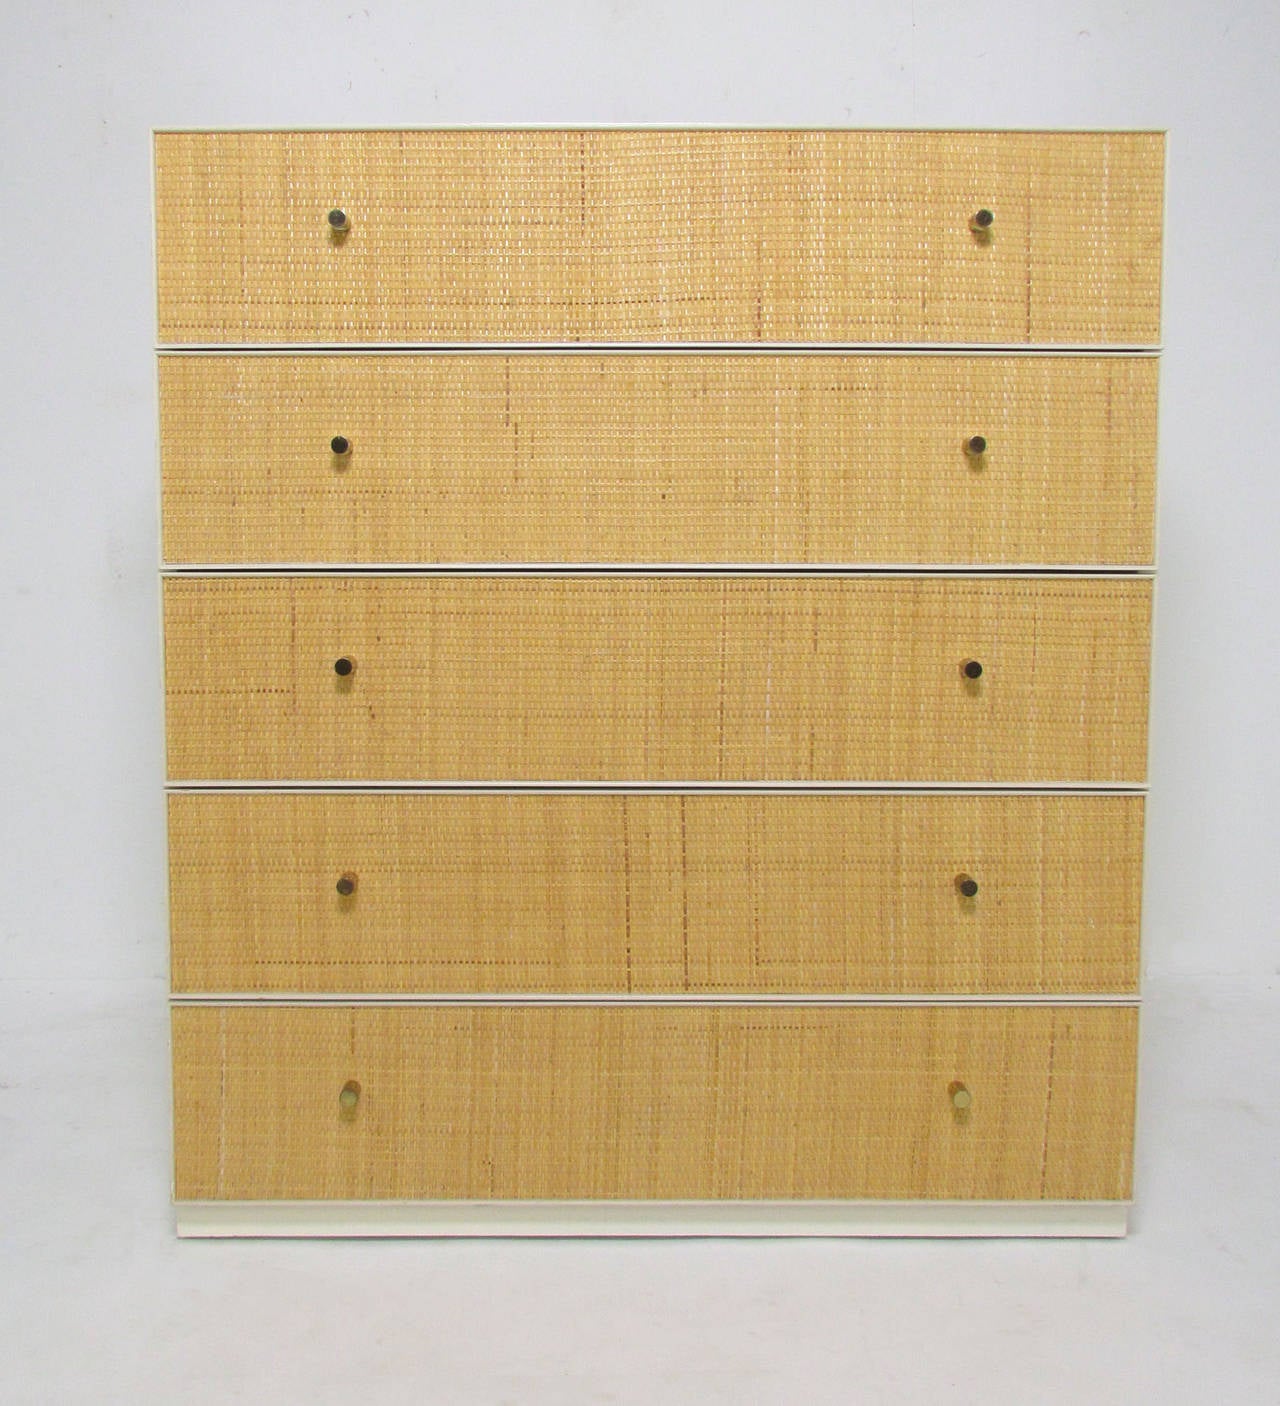 Five-drawer lacquered dresser with cane drawer fronts and brass pulls, labeled Directional, attributed to Harvey Probber, circa 1960s.